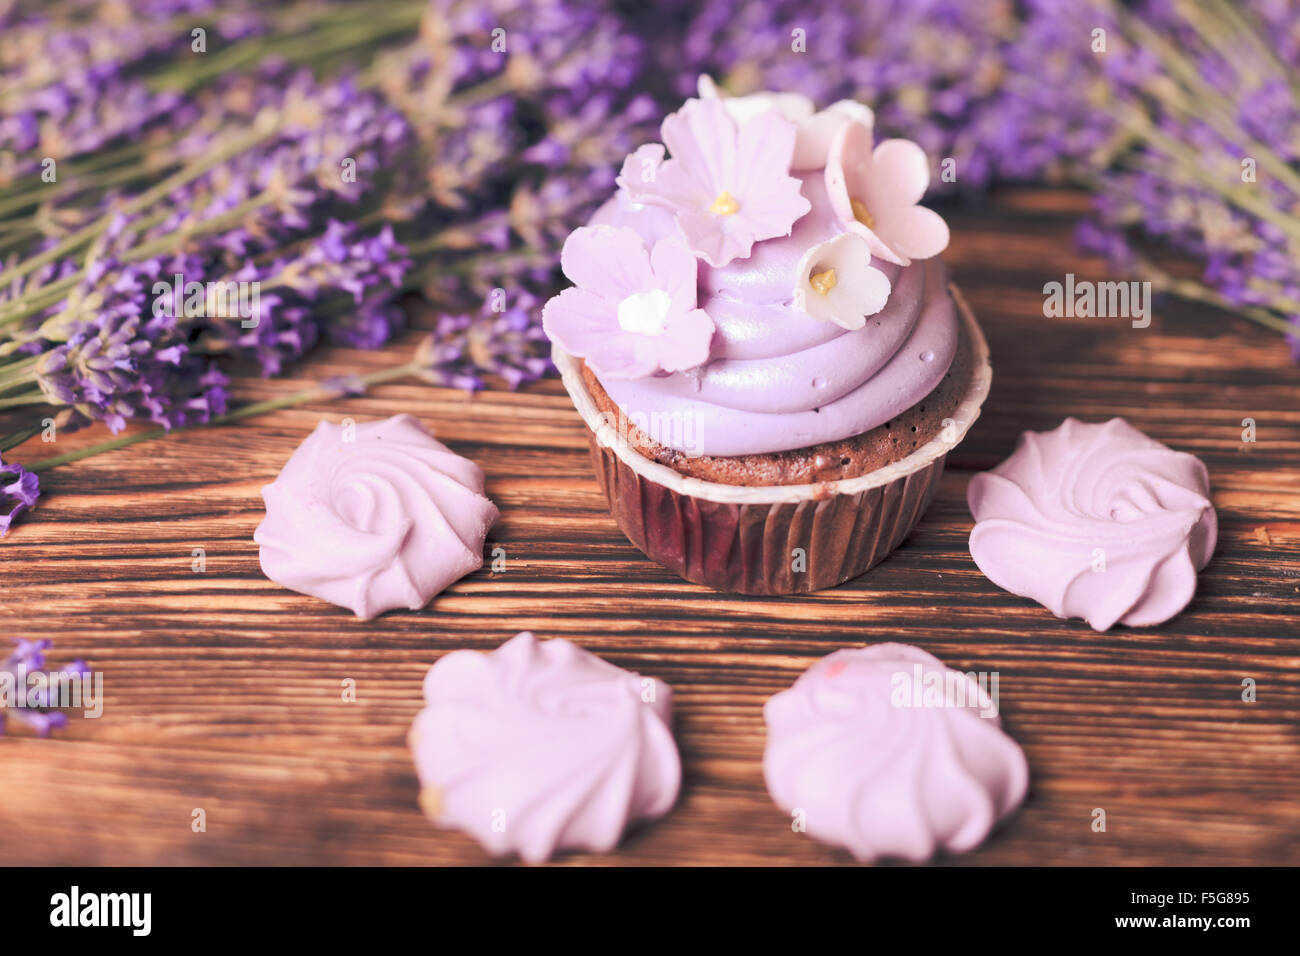 The Lavender cakes Stock Photo